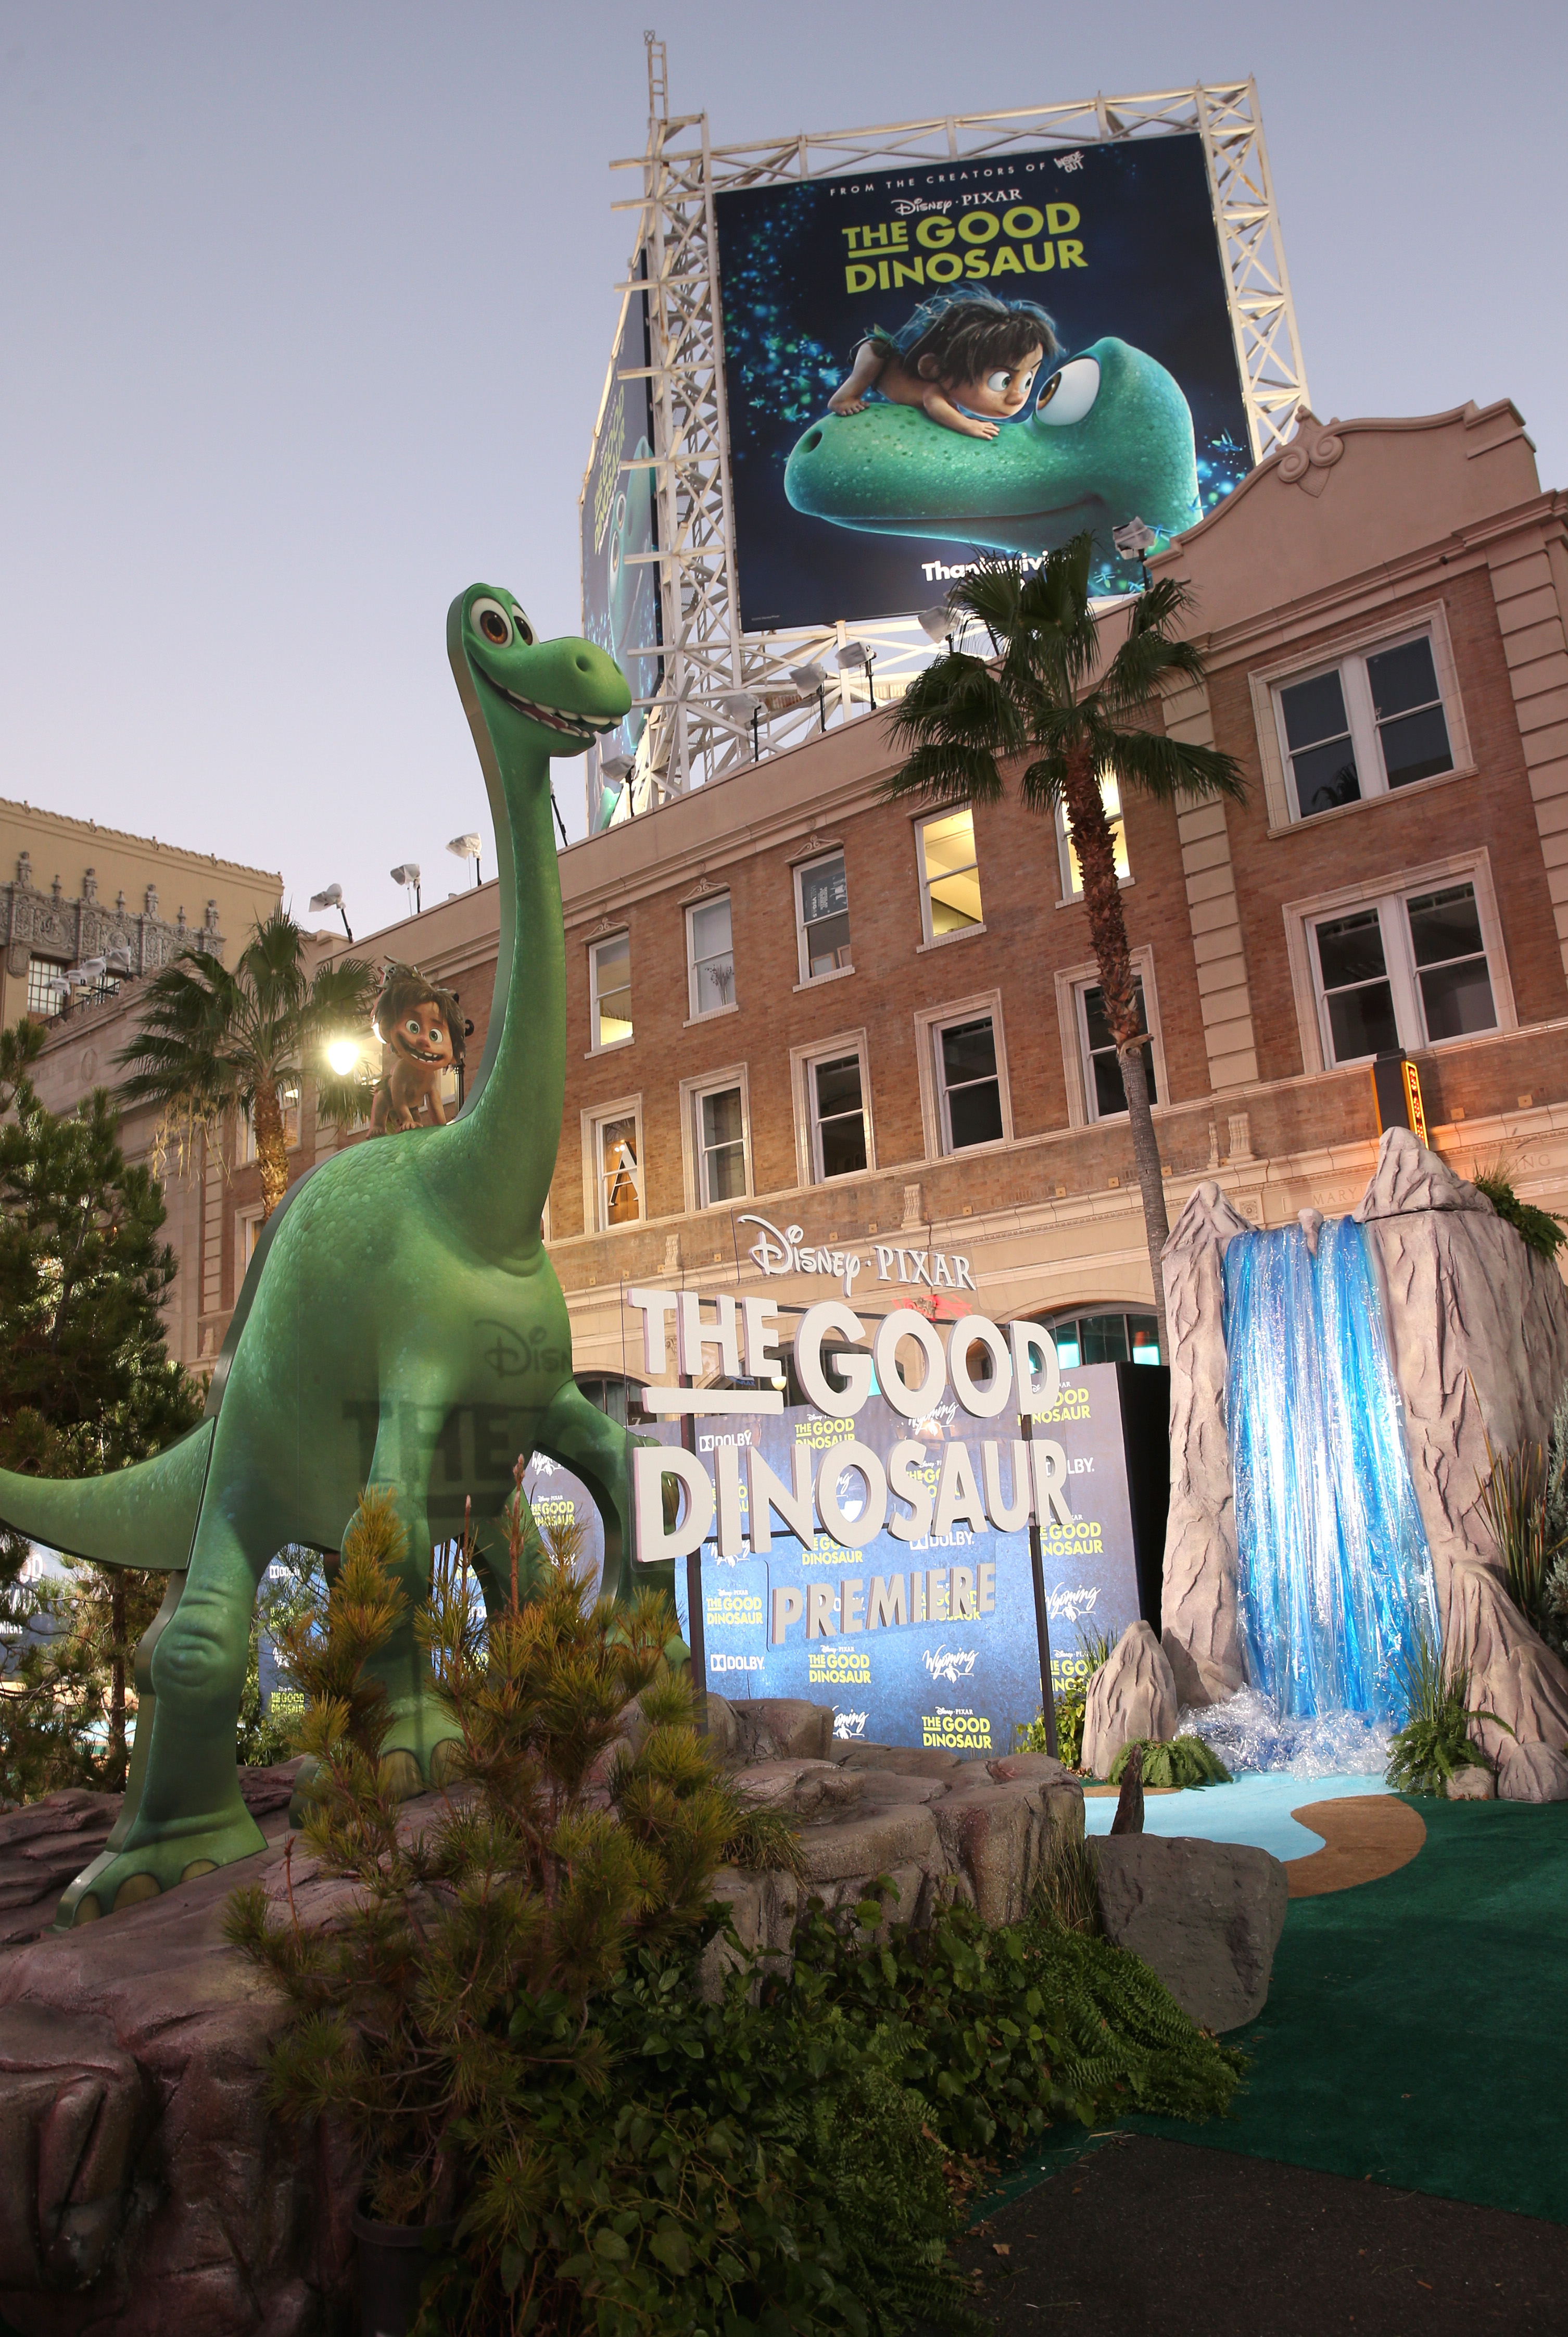 HOLLYWOOD, CA - NOVEMBER 17: A view of the atmosphere at the World Premiere Of Disney-Pixar's THE GOOD DINOSAUR at the El Capitan Theatre on November 17, 2015 in Hollywood, California. (Photo by Jesse Grant/Getty Images for Disney)